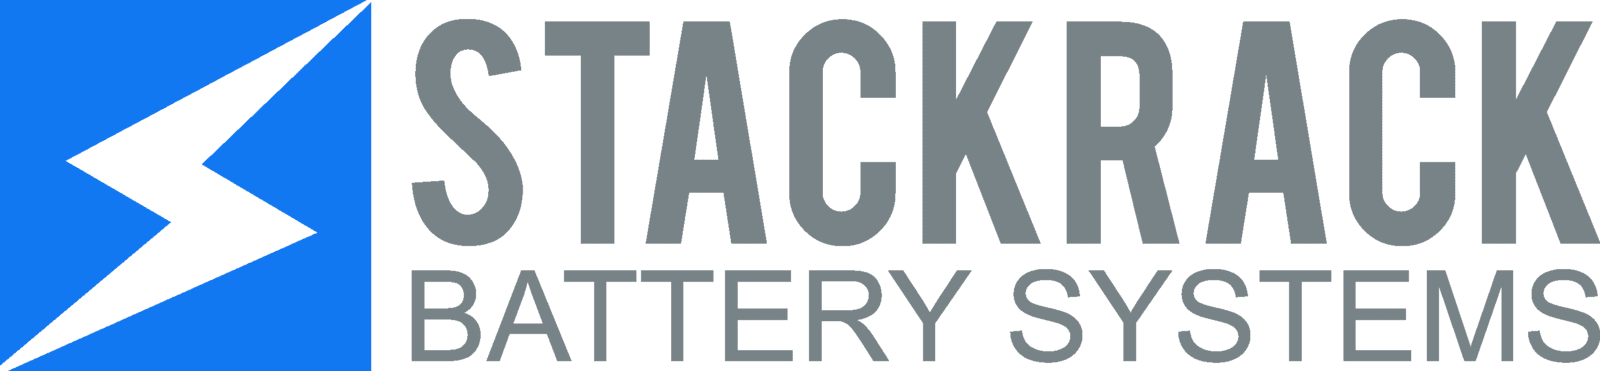 StackRack Battery Systems